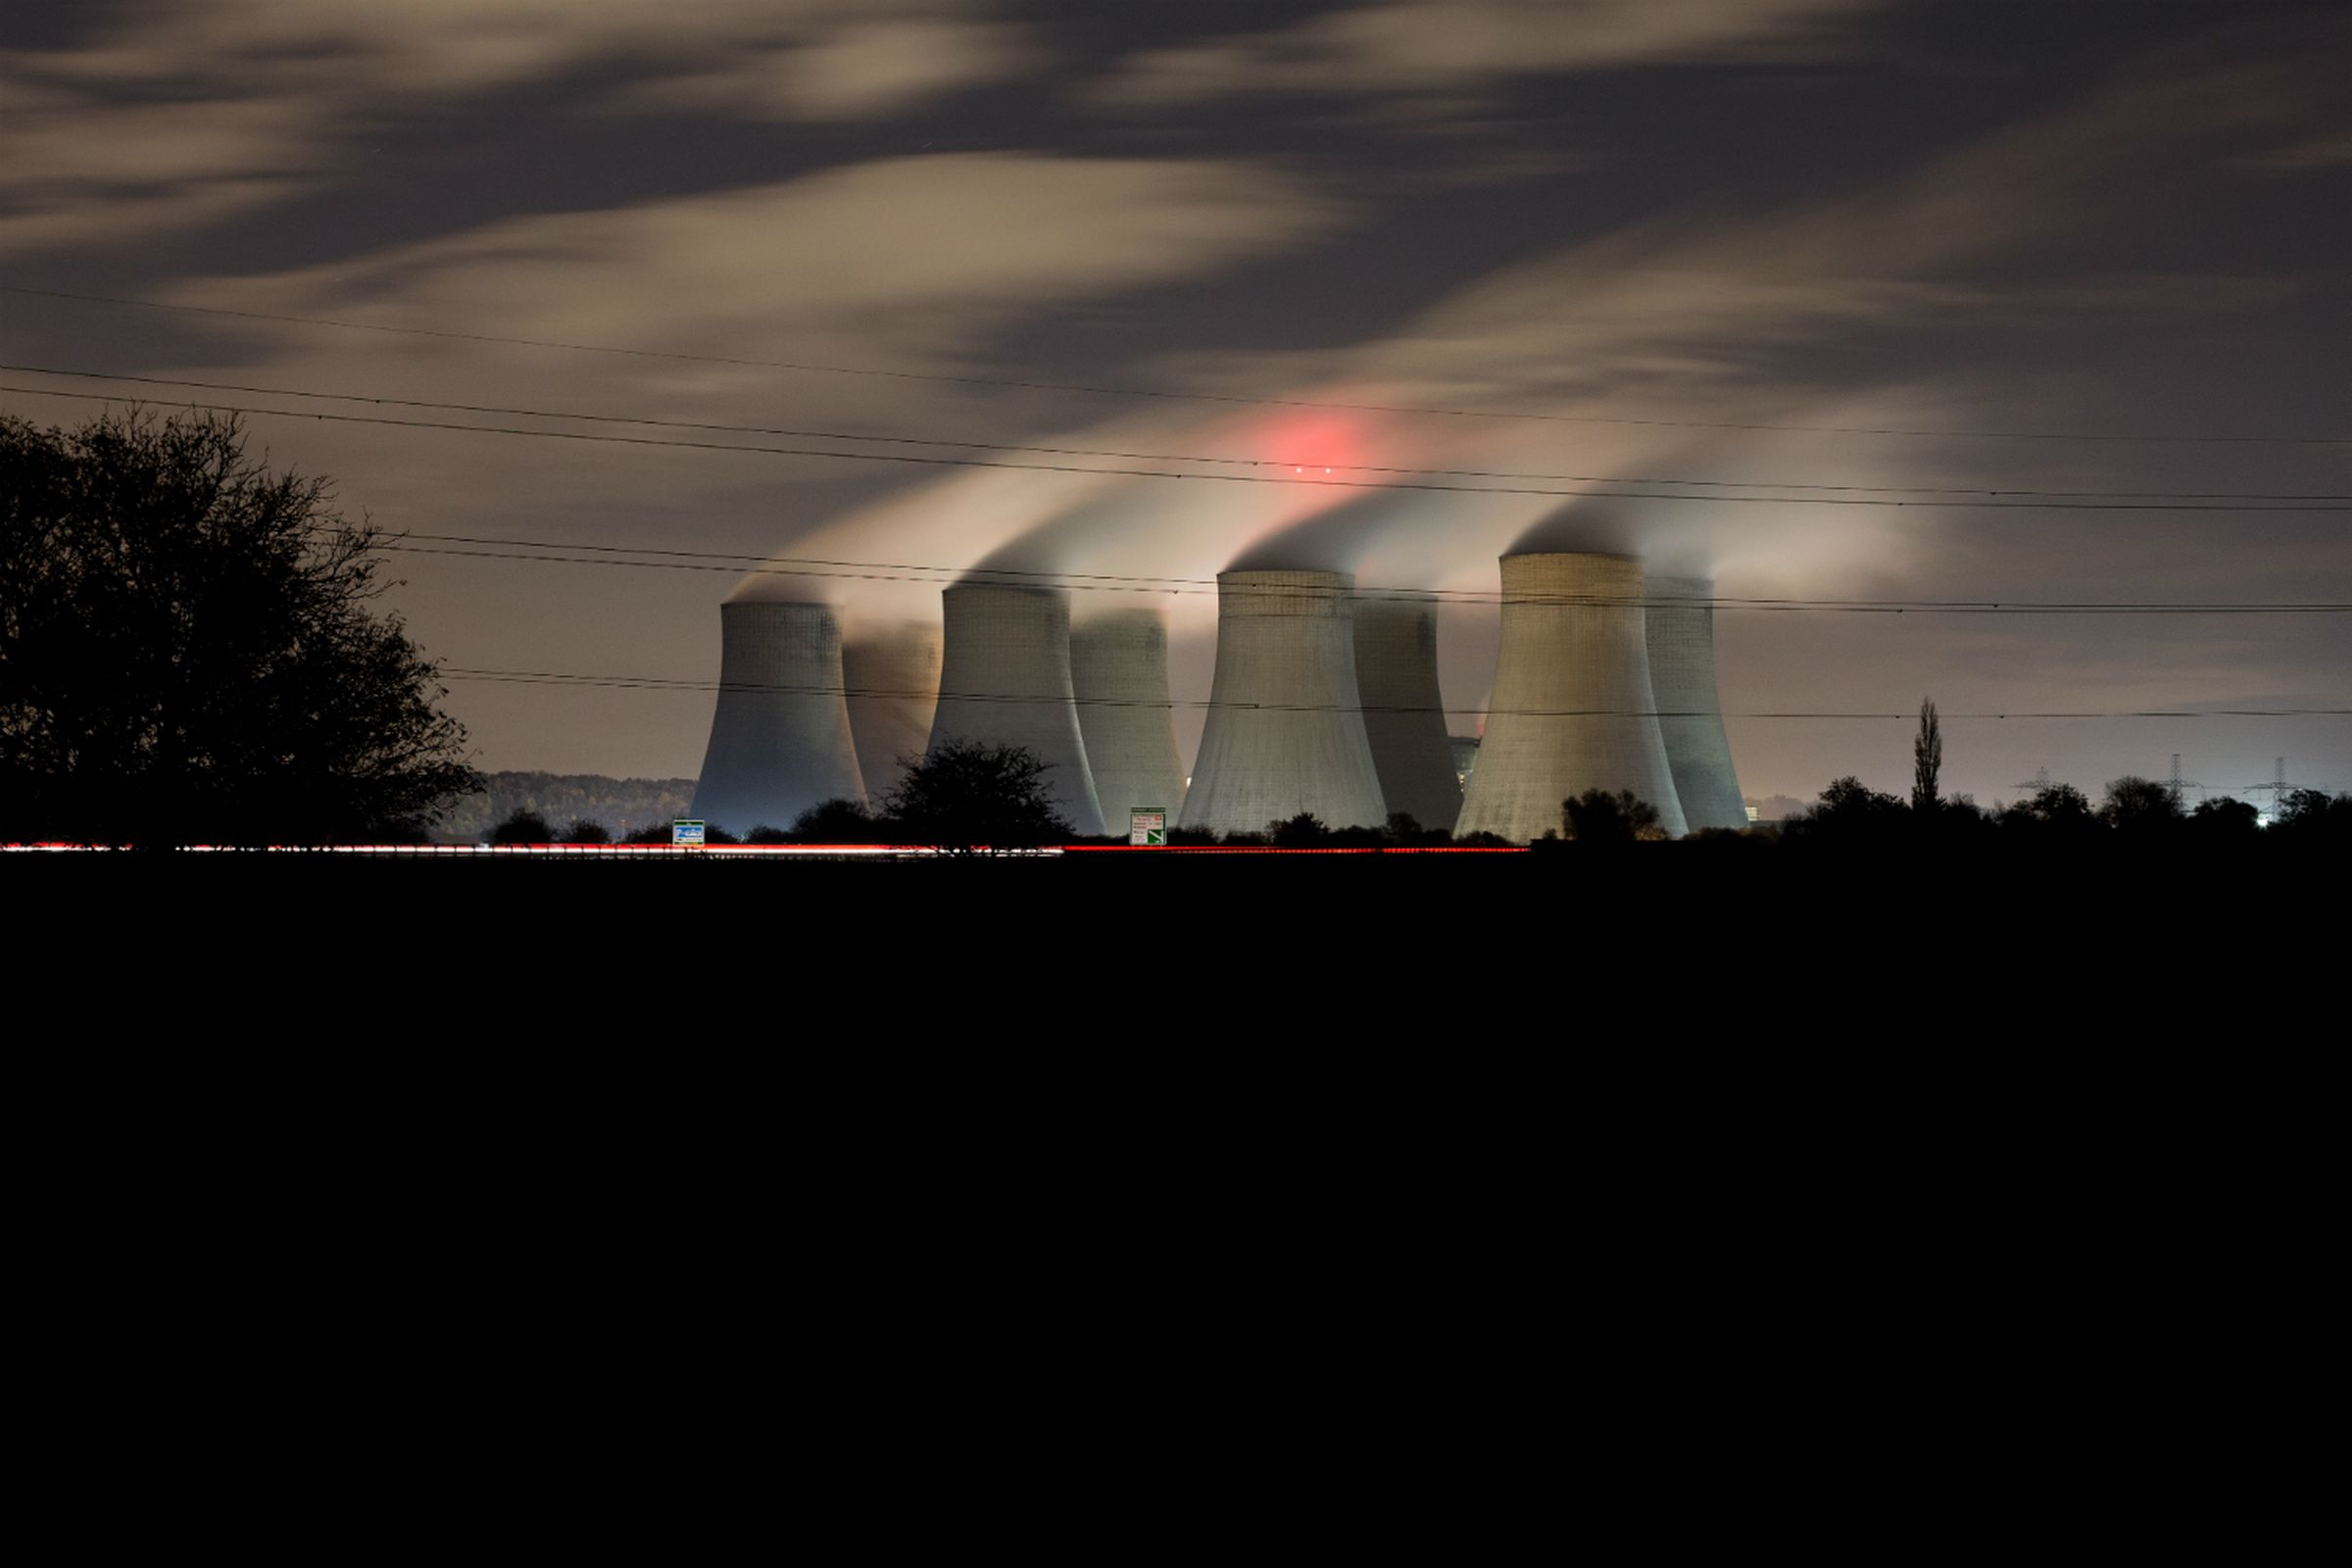 Drax coal power station in the United Kingdom